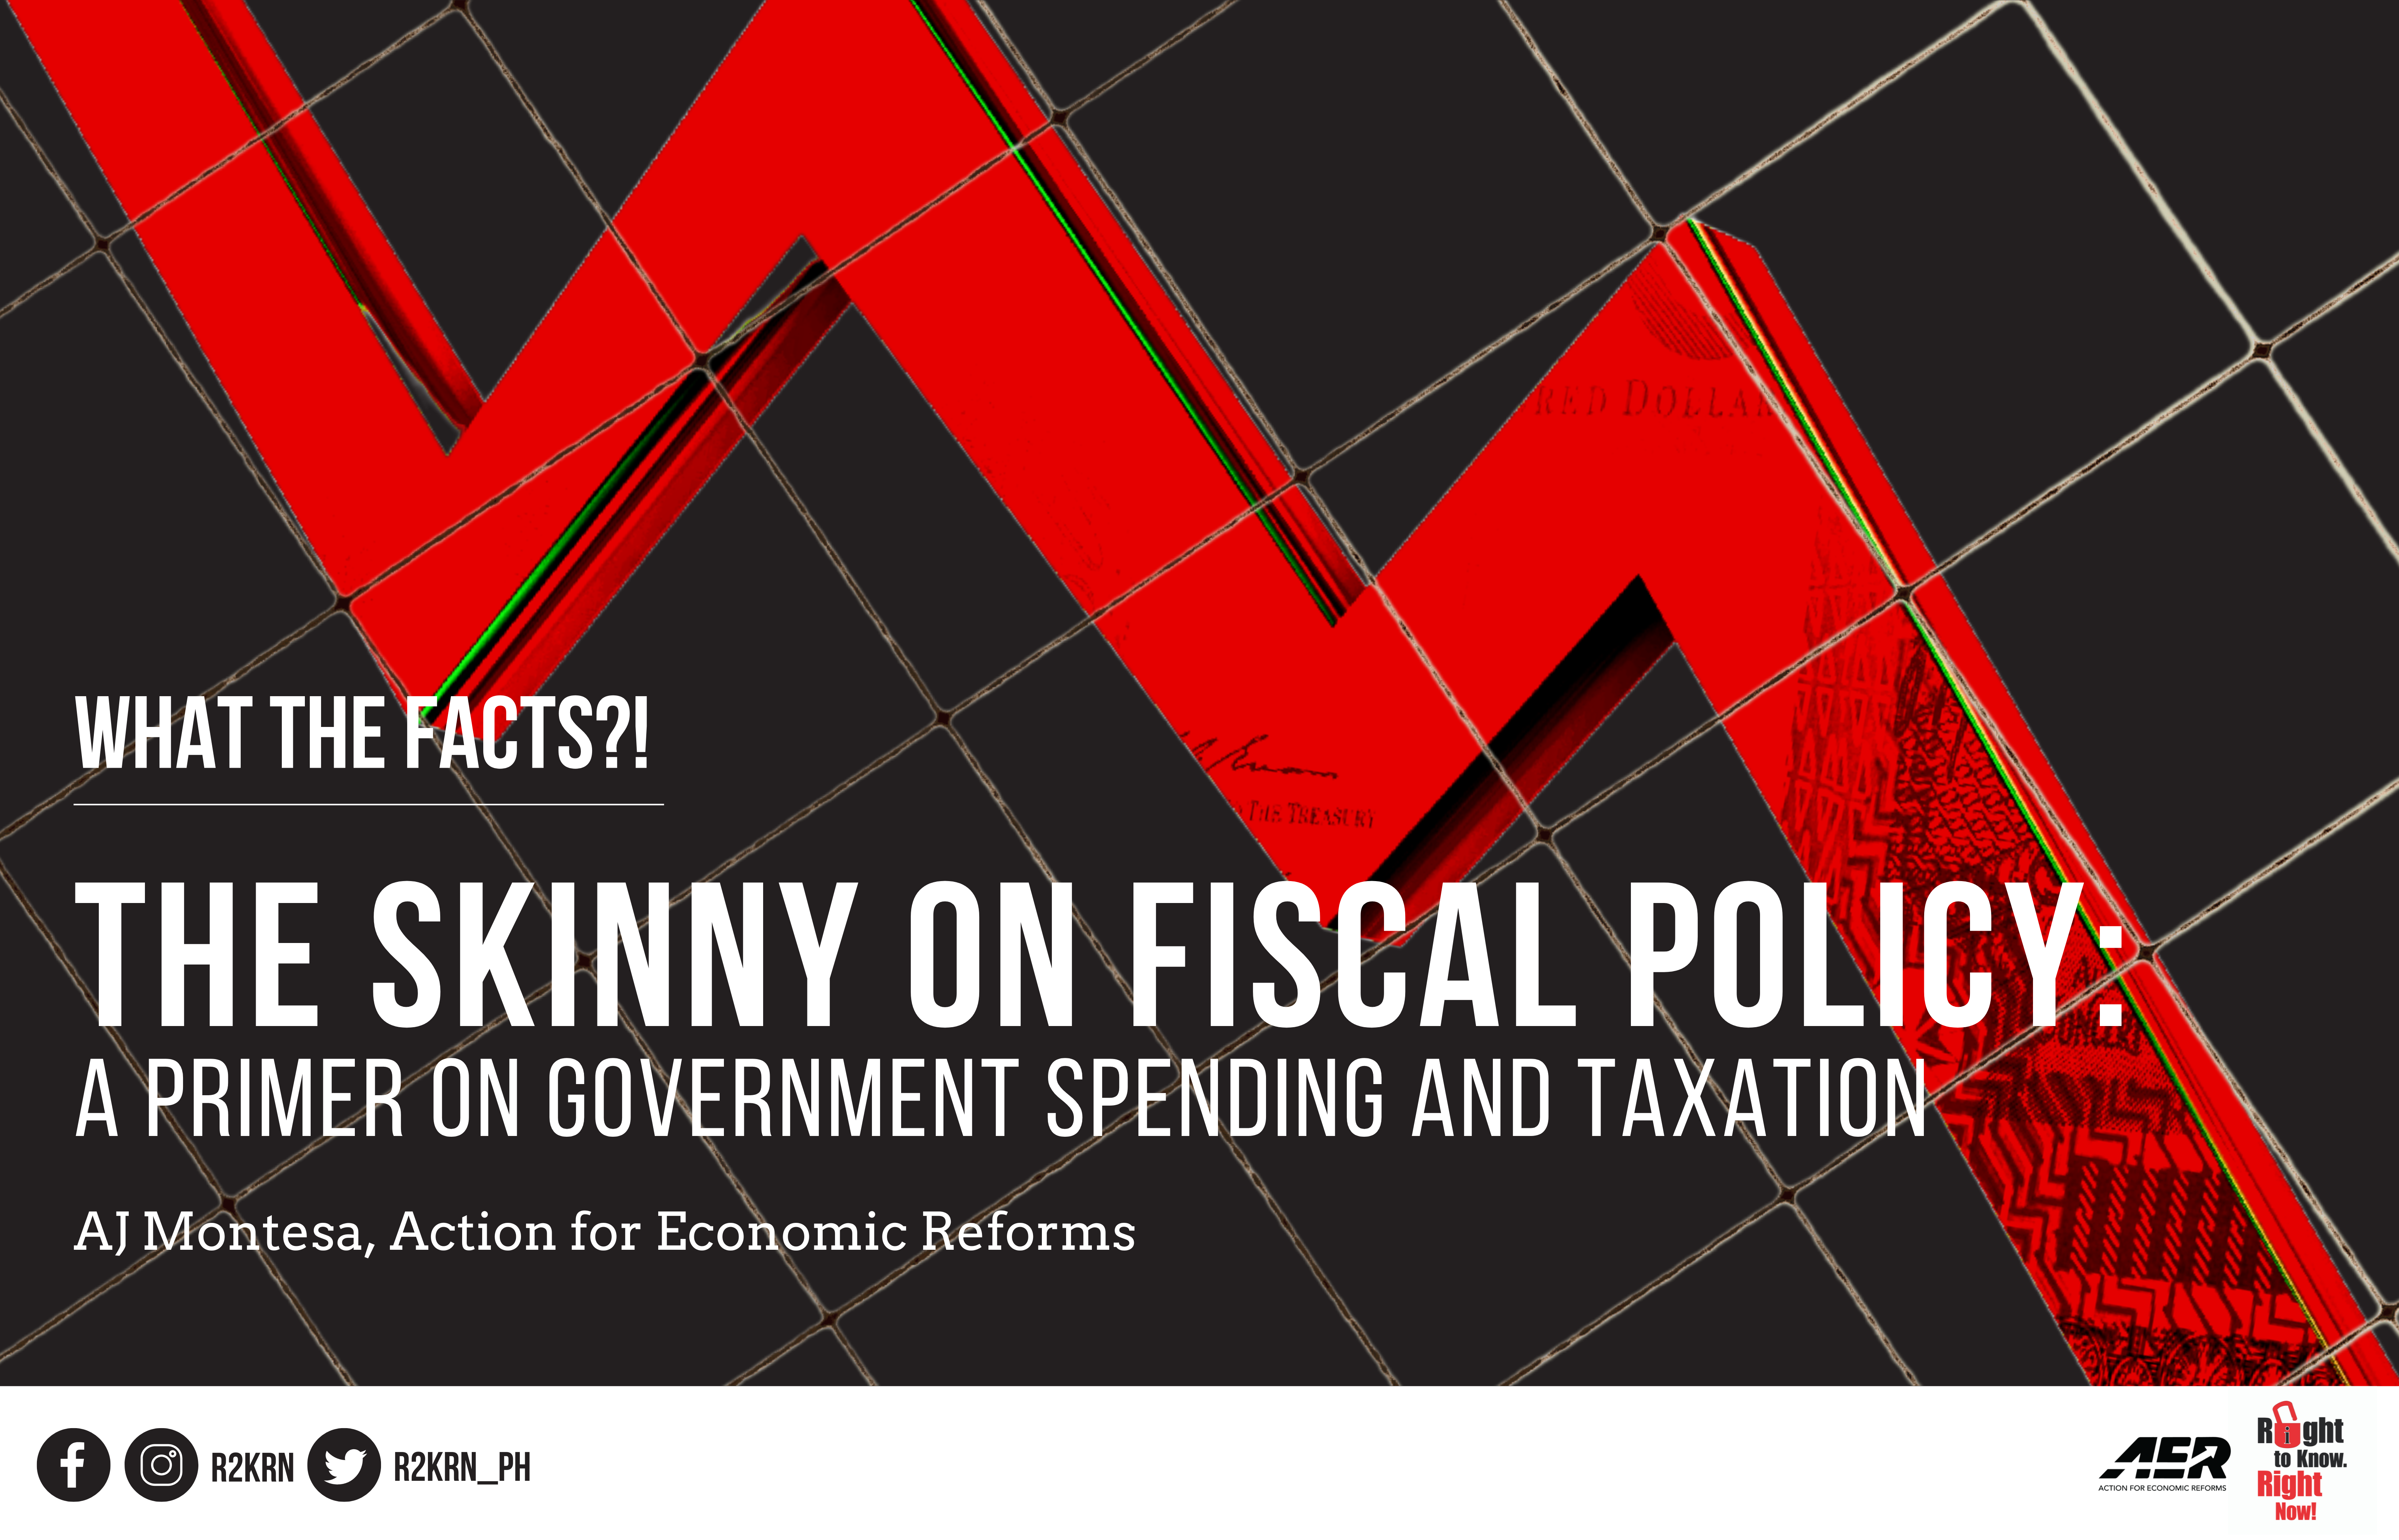 The Skinny on Fiscal Policy